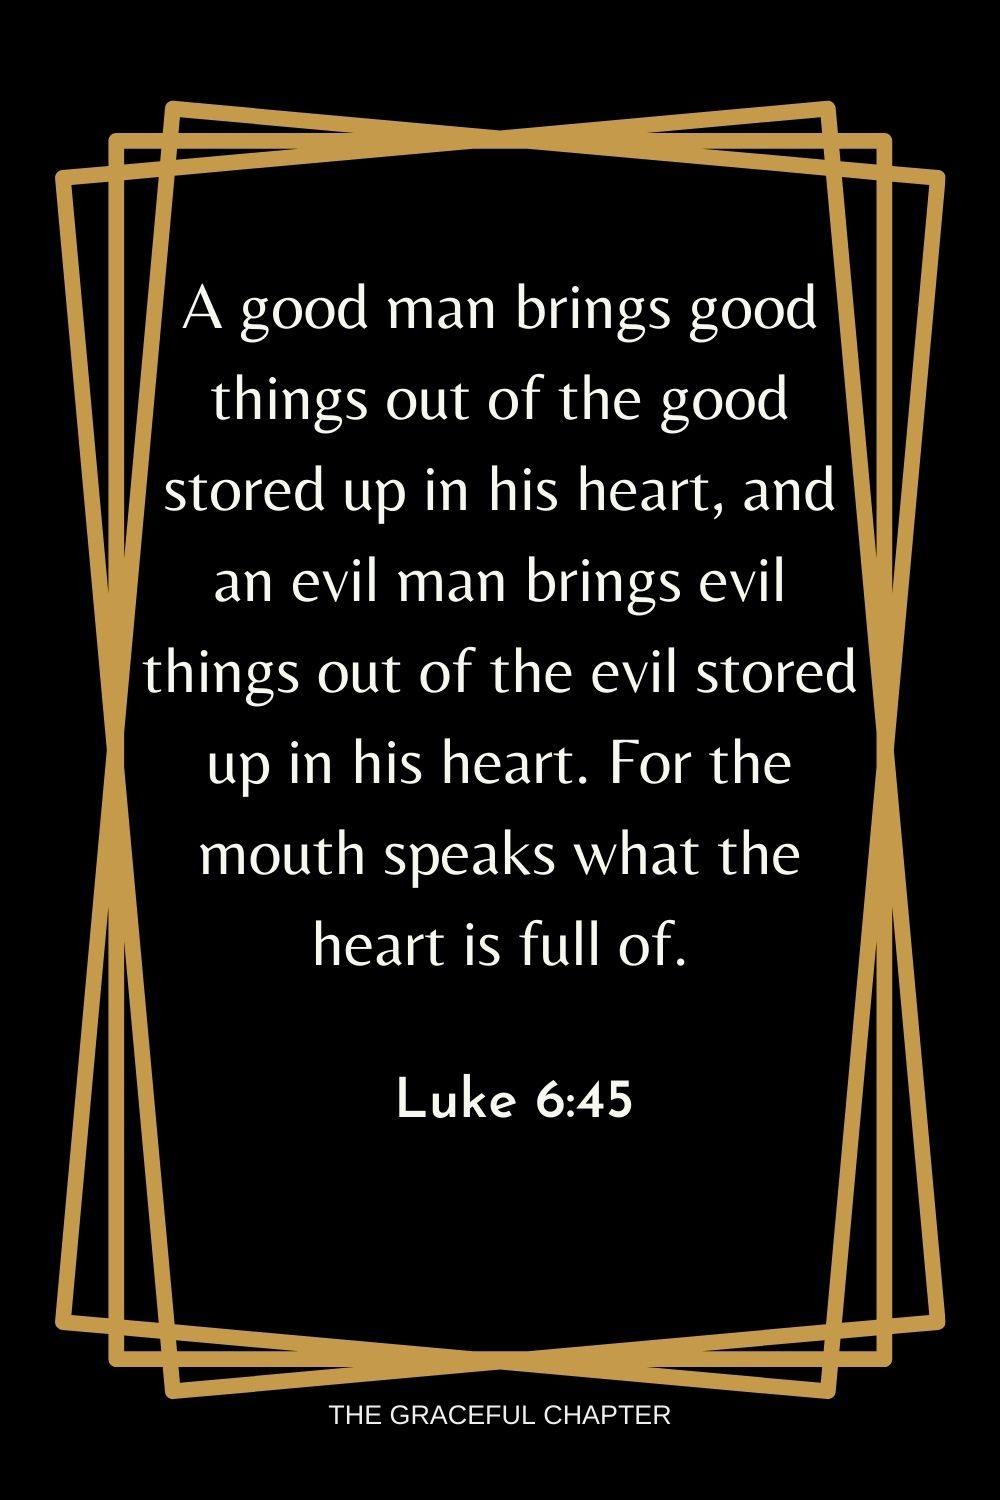 A good man brings good things out of the good stored up in his heart, and an evil man brings evil things out of the evil stored up in his heart. For the mouth speaks what the heart is full of. Luke 6:45